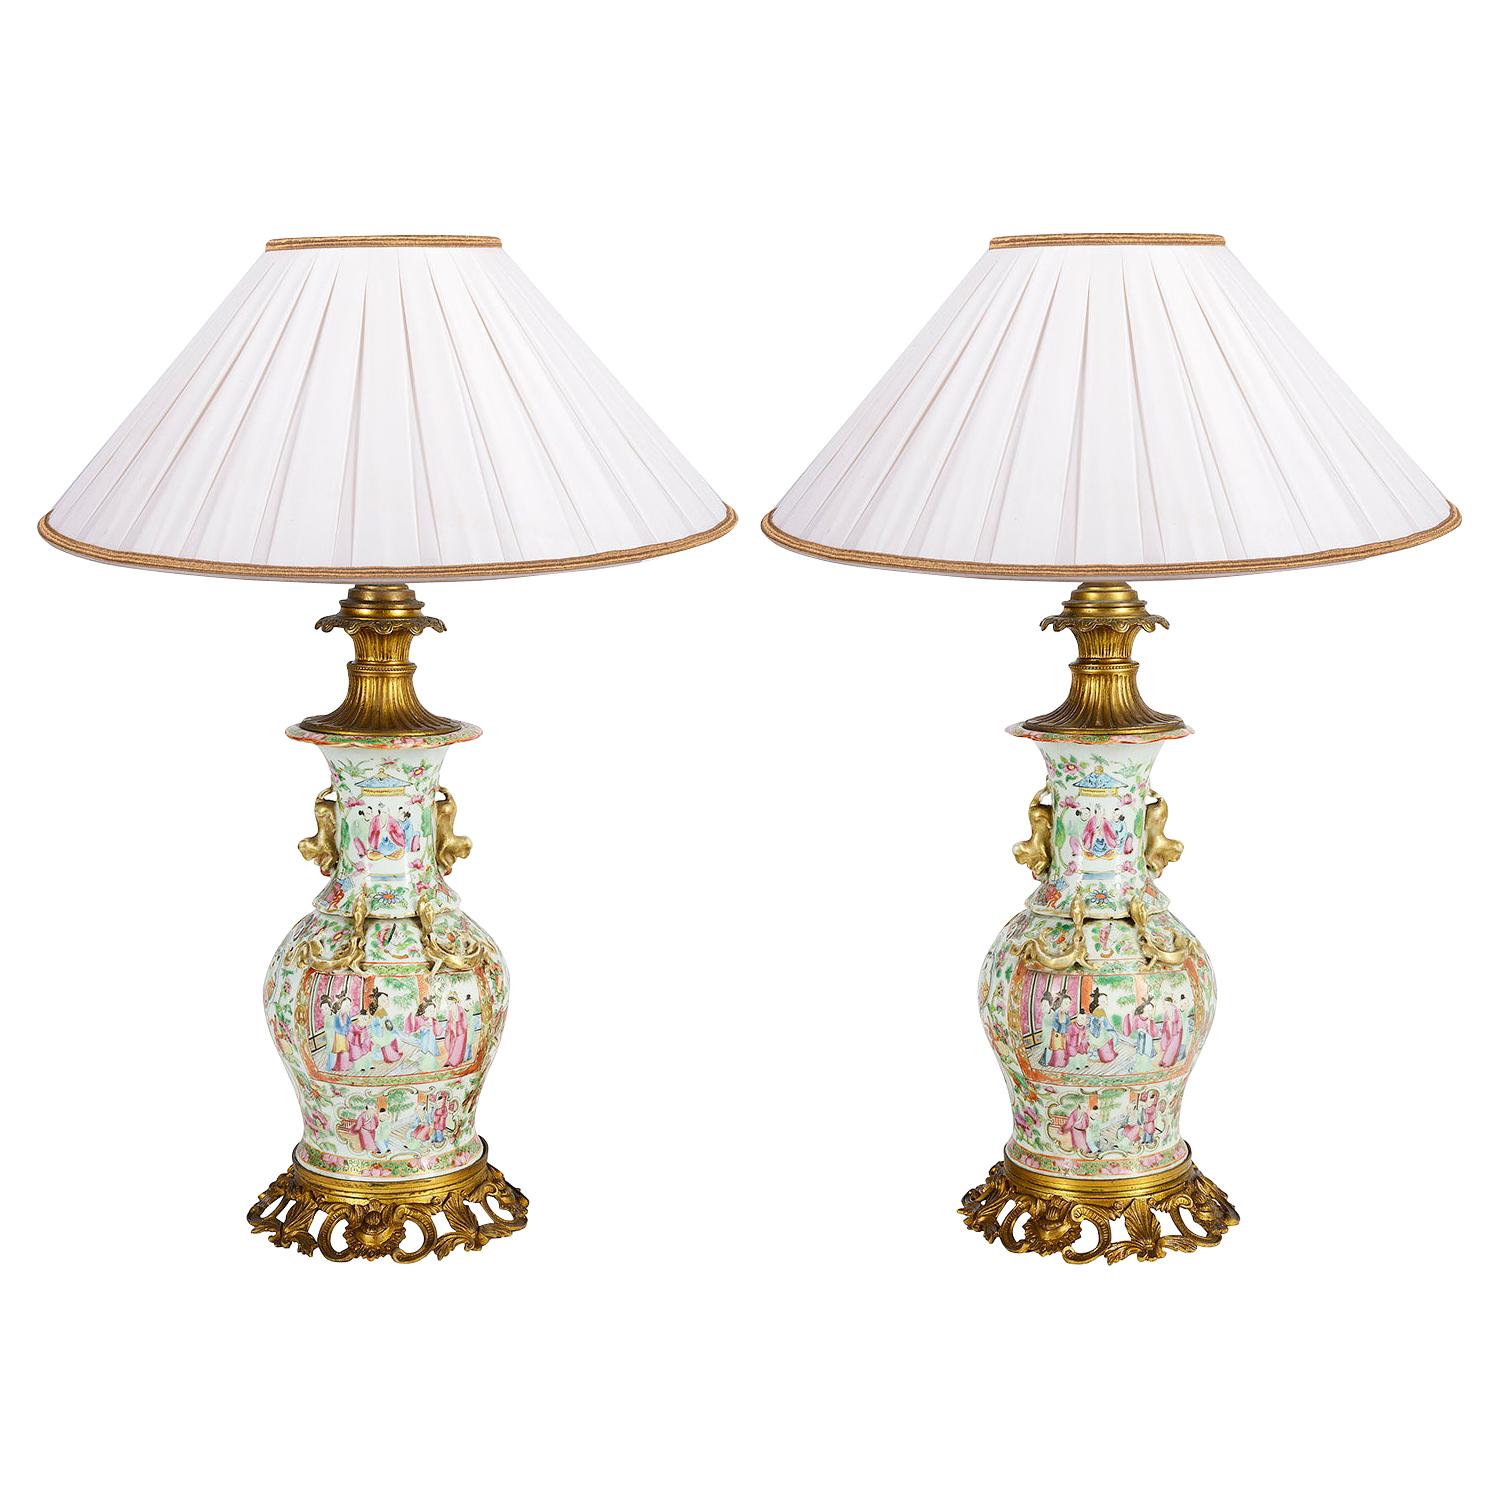 Pair of 19th Century Rose Medallion Ormolu Mounted Vases / Lamps For Sale